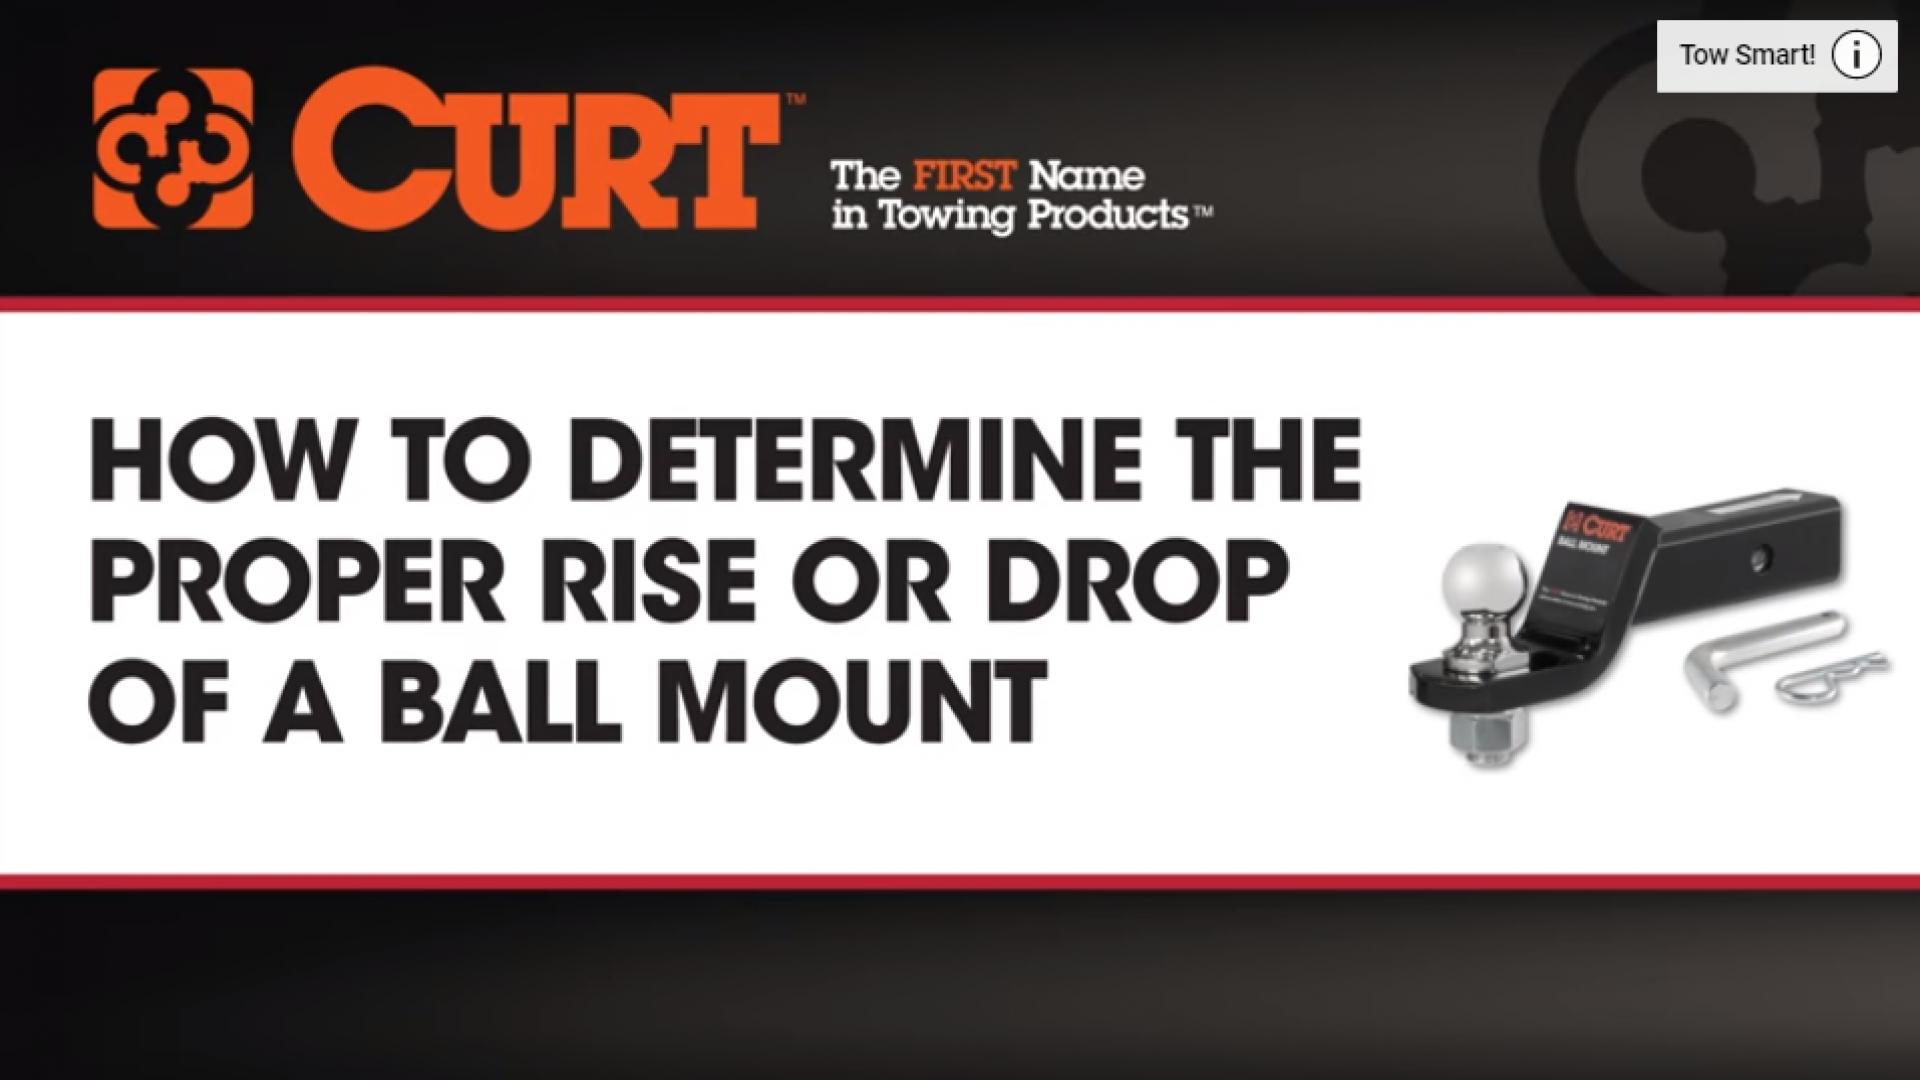 How to Determine the Proper Rise or Drop of a Ball Mount - CURT Having a level towing setup is important!  This brief video will show you how to determine the proper rise or drop needed of your a ball mount to ensure you have a safe and level towing setup.  

Follow this simple formula:
Trailer Coupler Height   -   Receiver Tube Height    =   Rise or Drop Needed